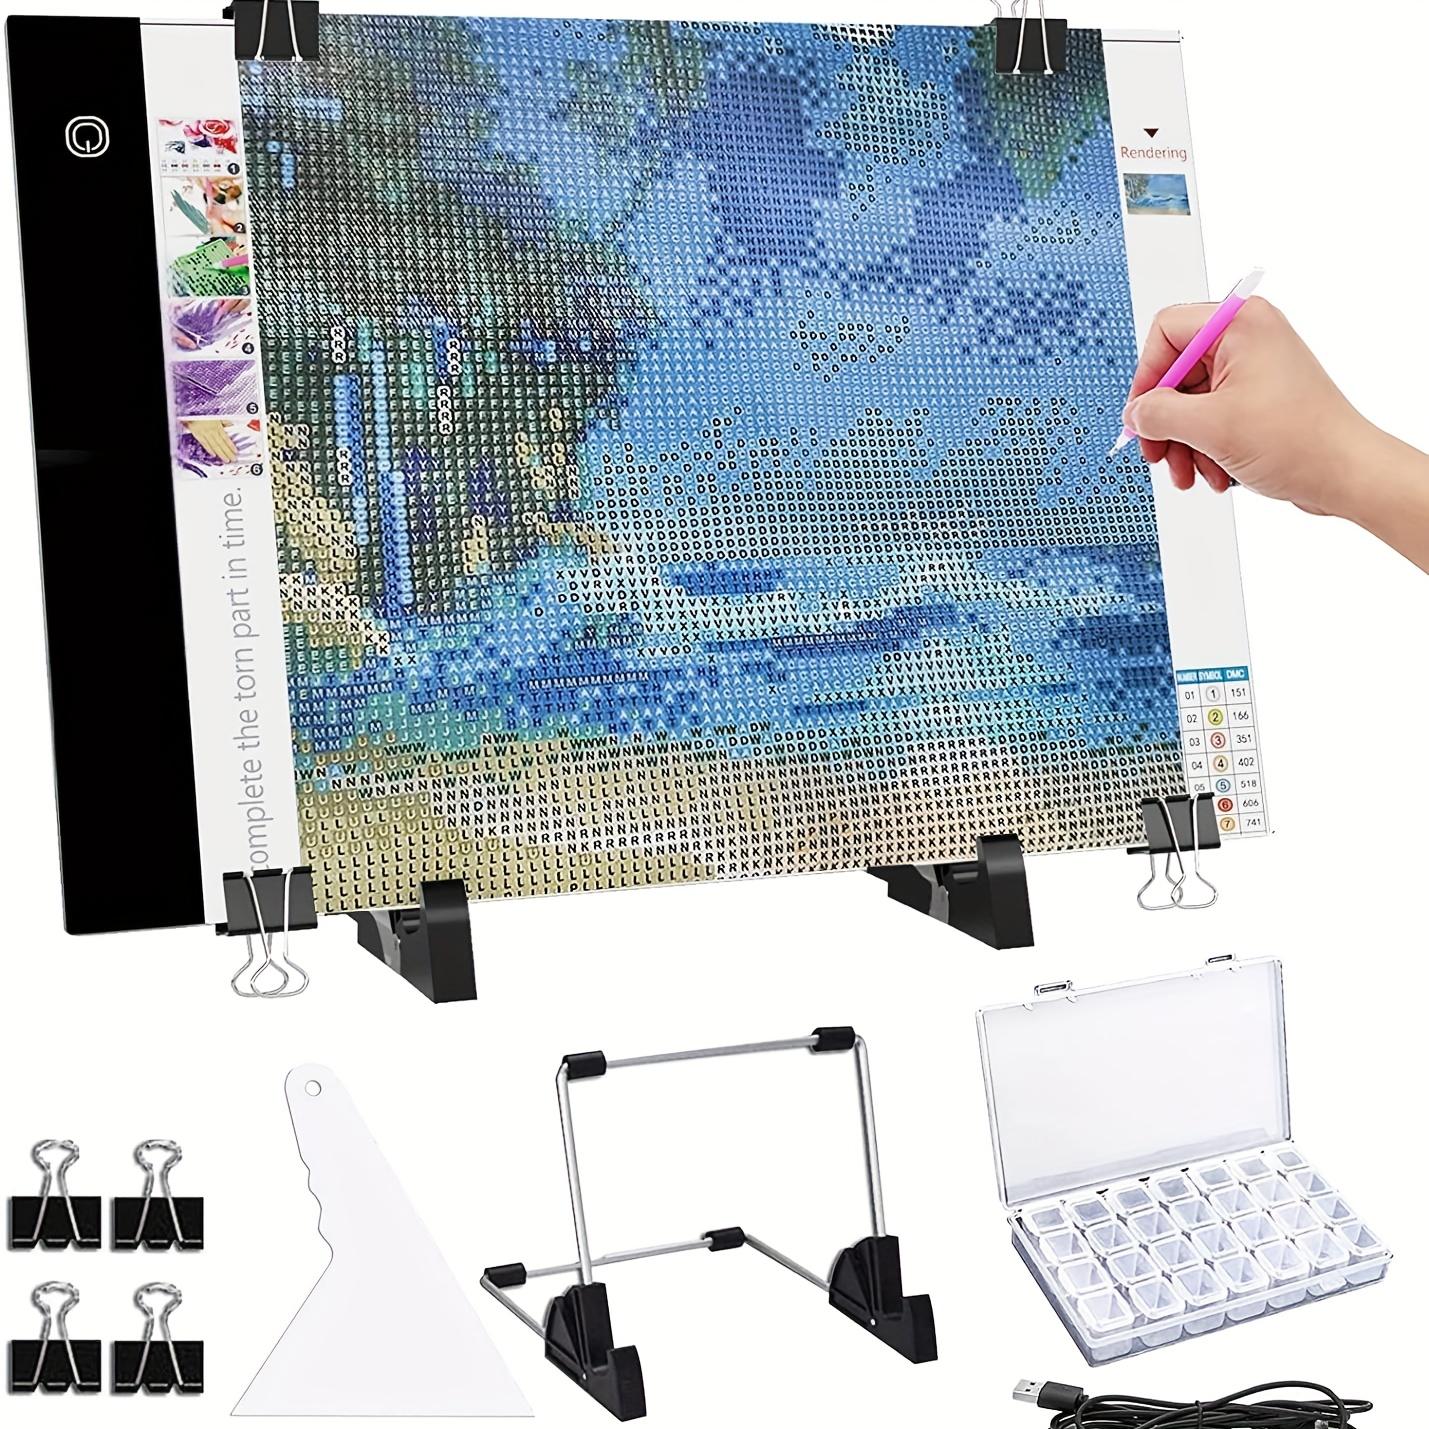 New A4 / A5 Size 5D LED Diamond Drawing Light Board Kit, Suitable for  Full-drill and Part-drilling Boards, Copyboards, Drawing Boards, Adjustable  Brightness, and USB-powered Projector Kit